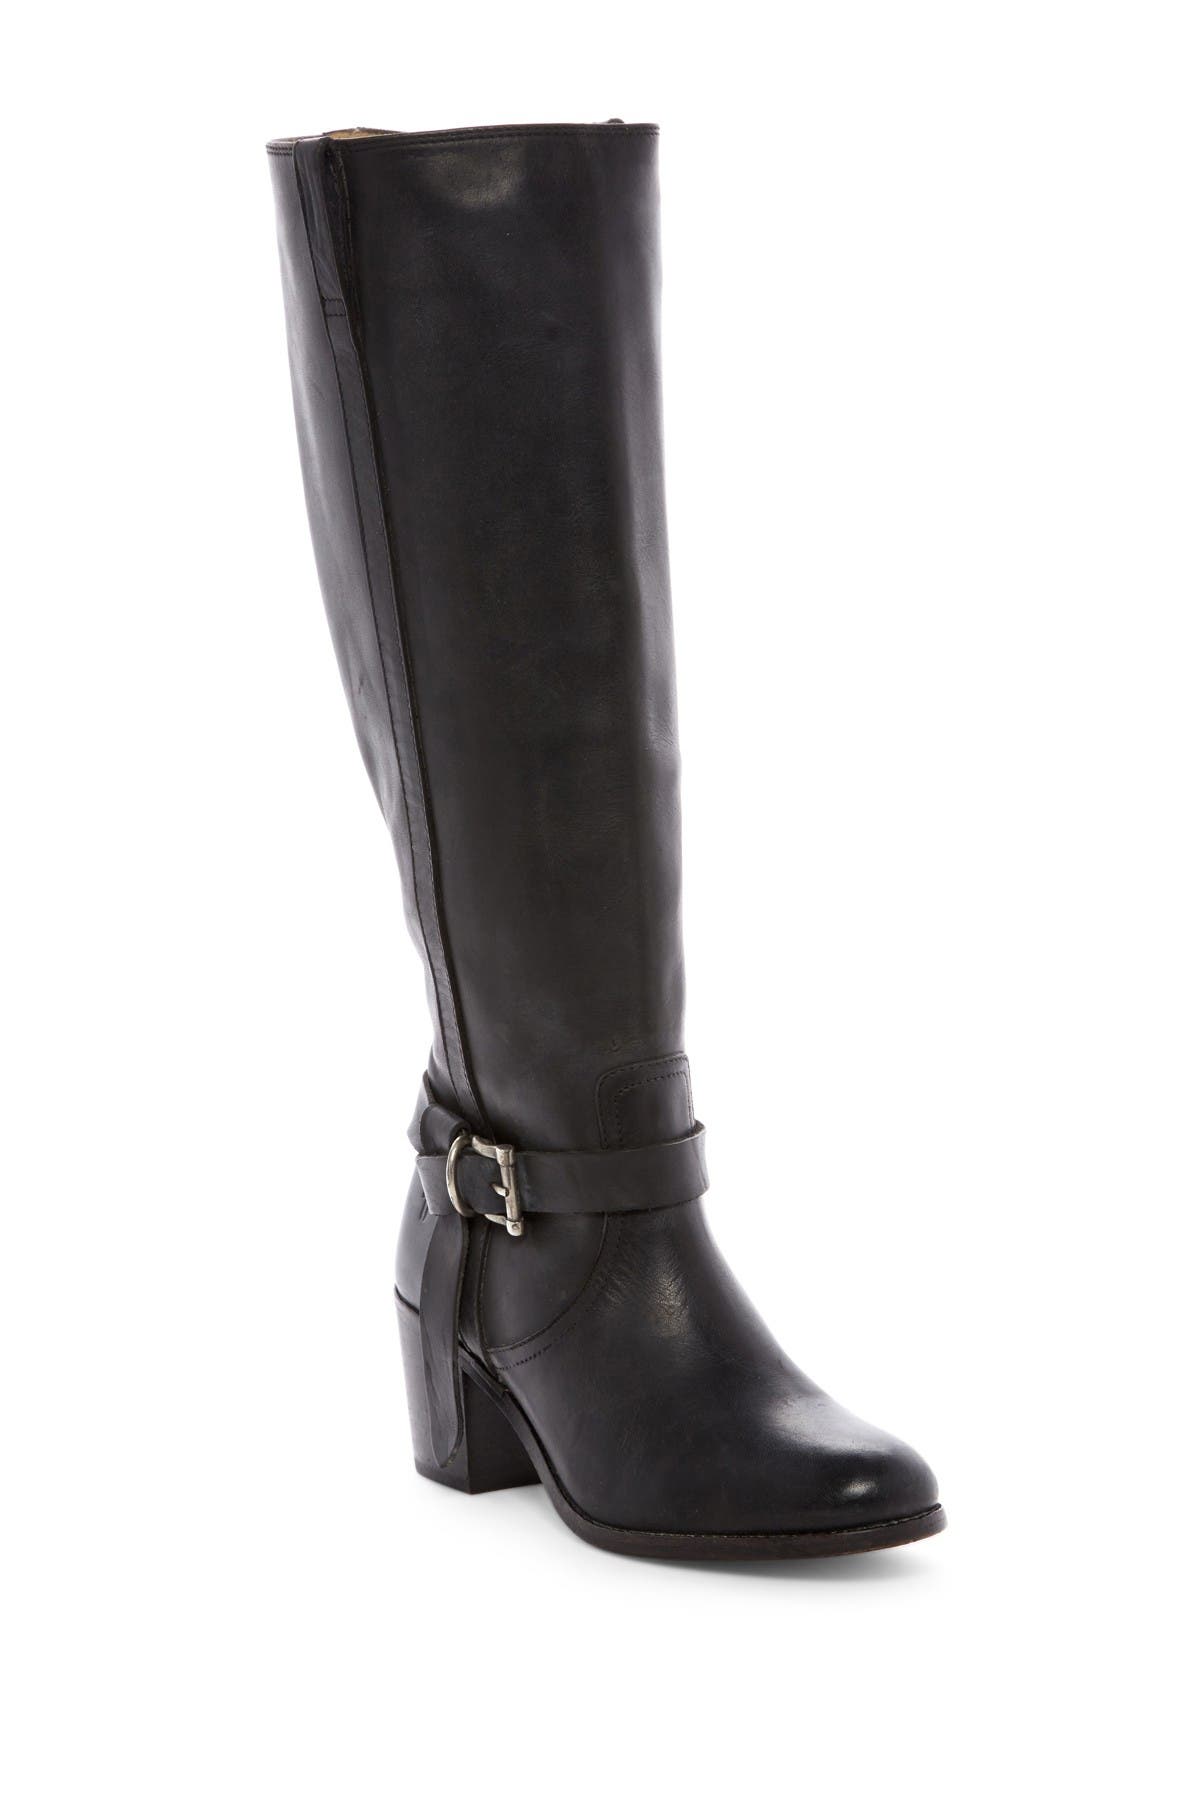 Frye | Malorie Knotted Tall Boot 